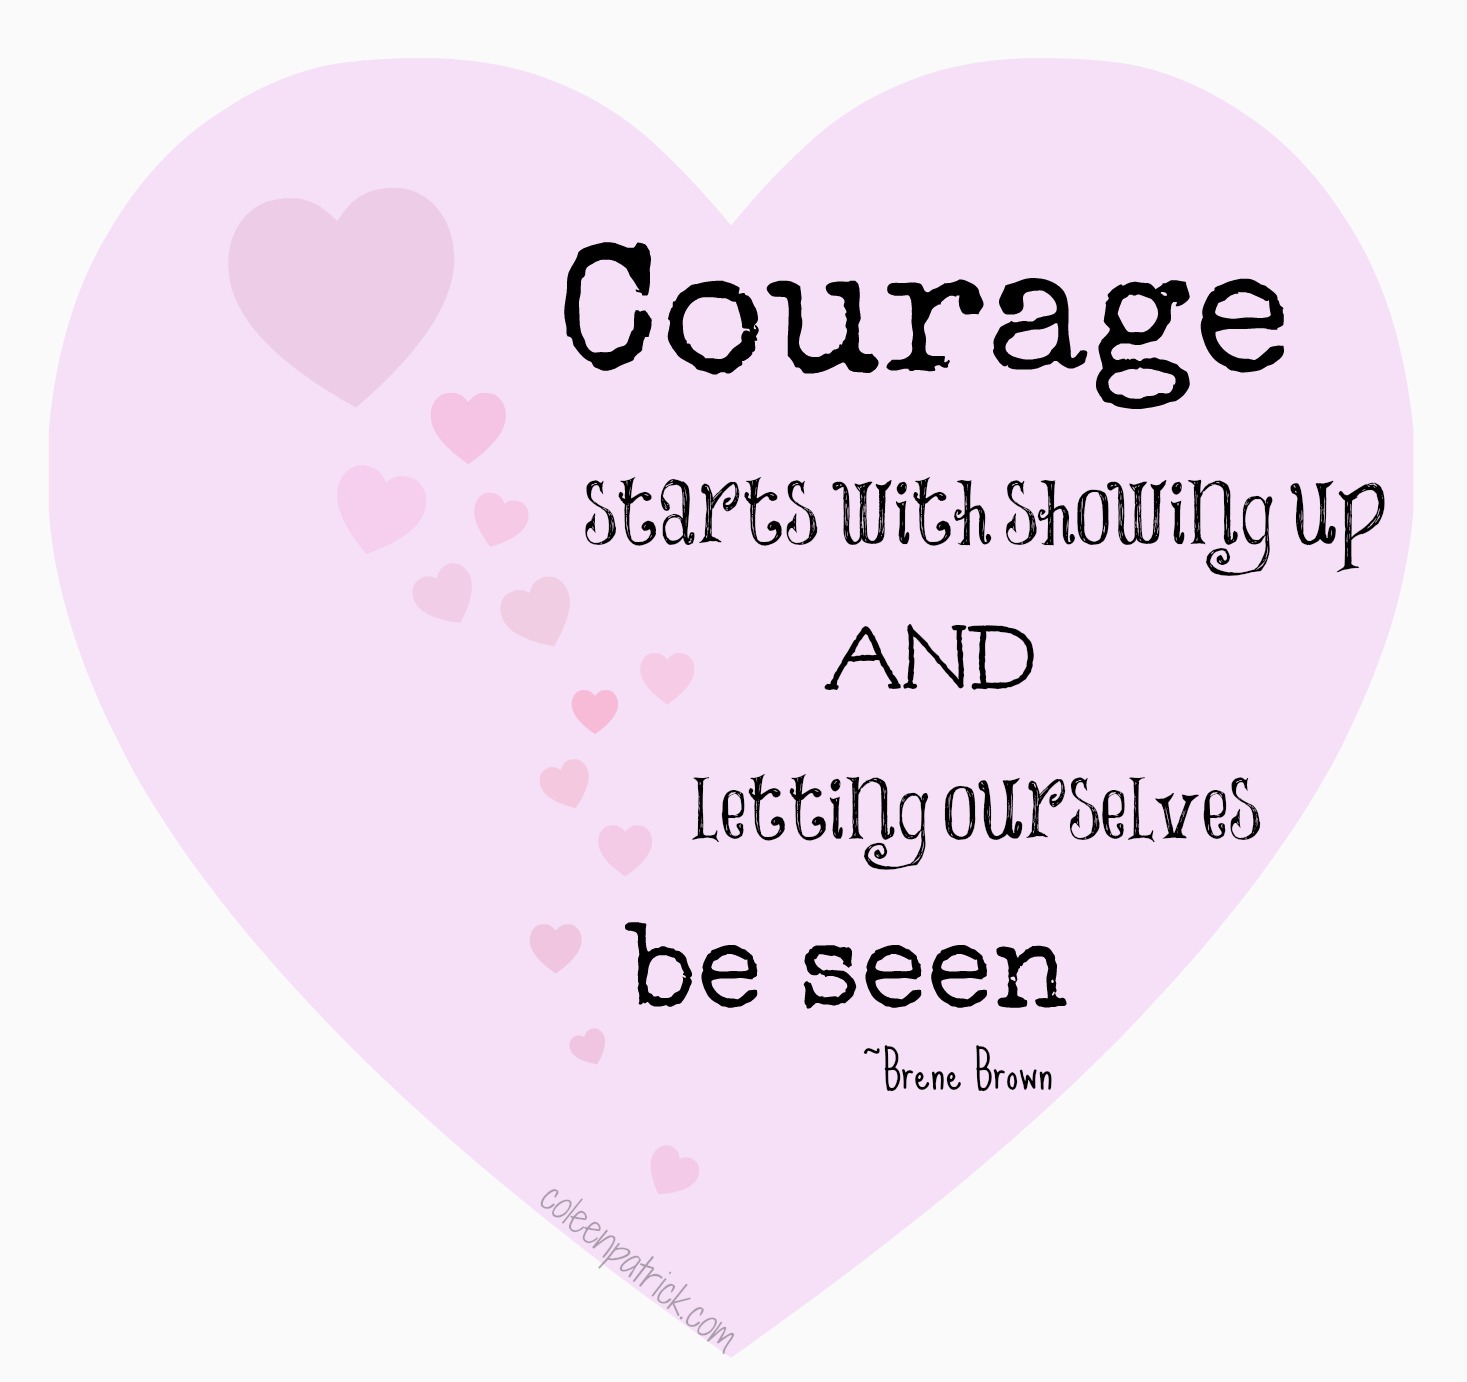 Courage Sarts With Showing Up And Letting Ourselves Be Seen  - Brene Brown